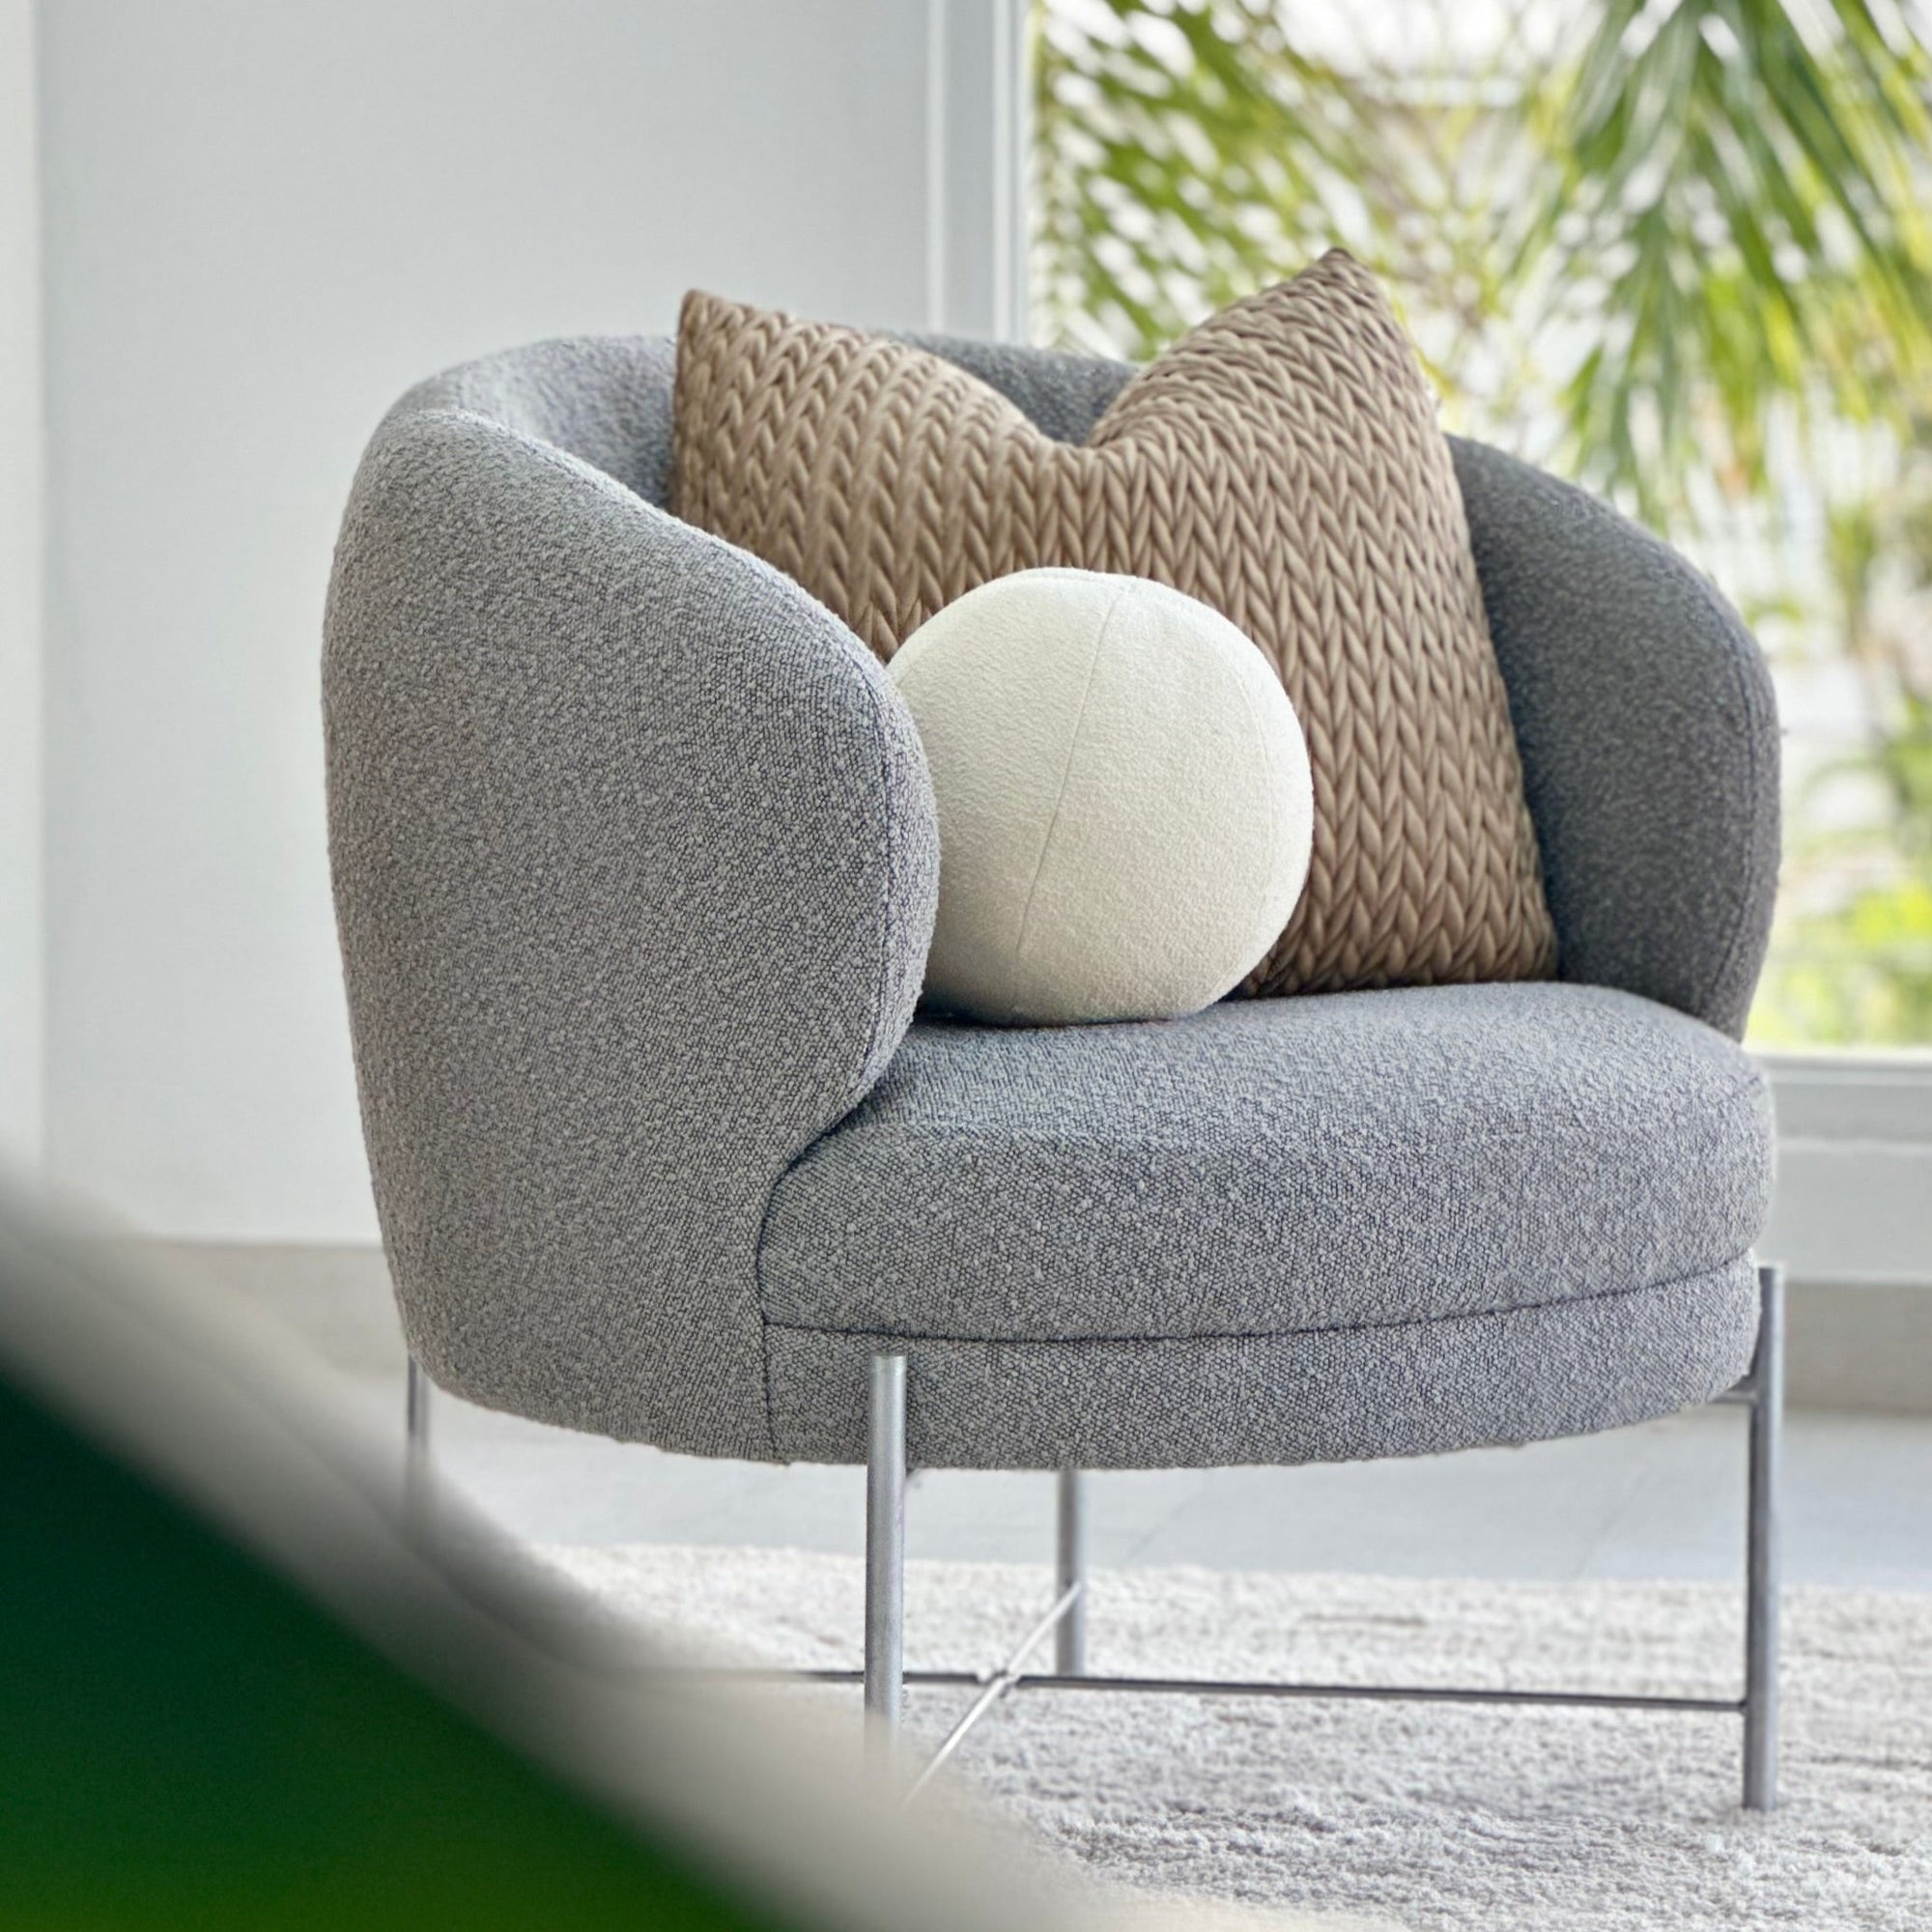 Terry Gray Fabric Round Chair